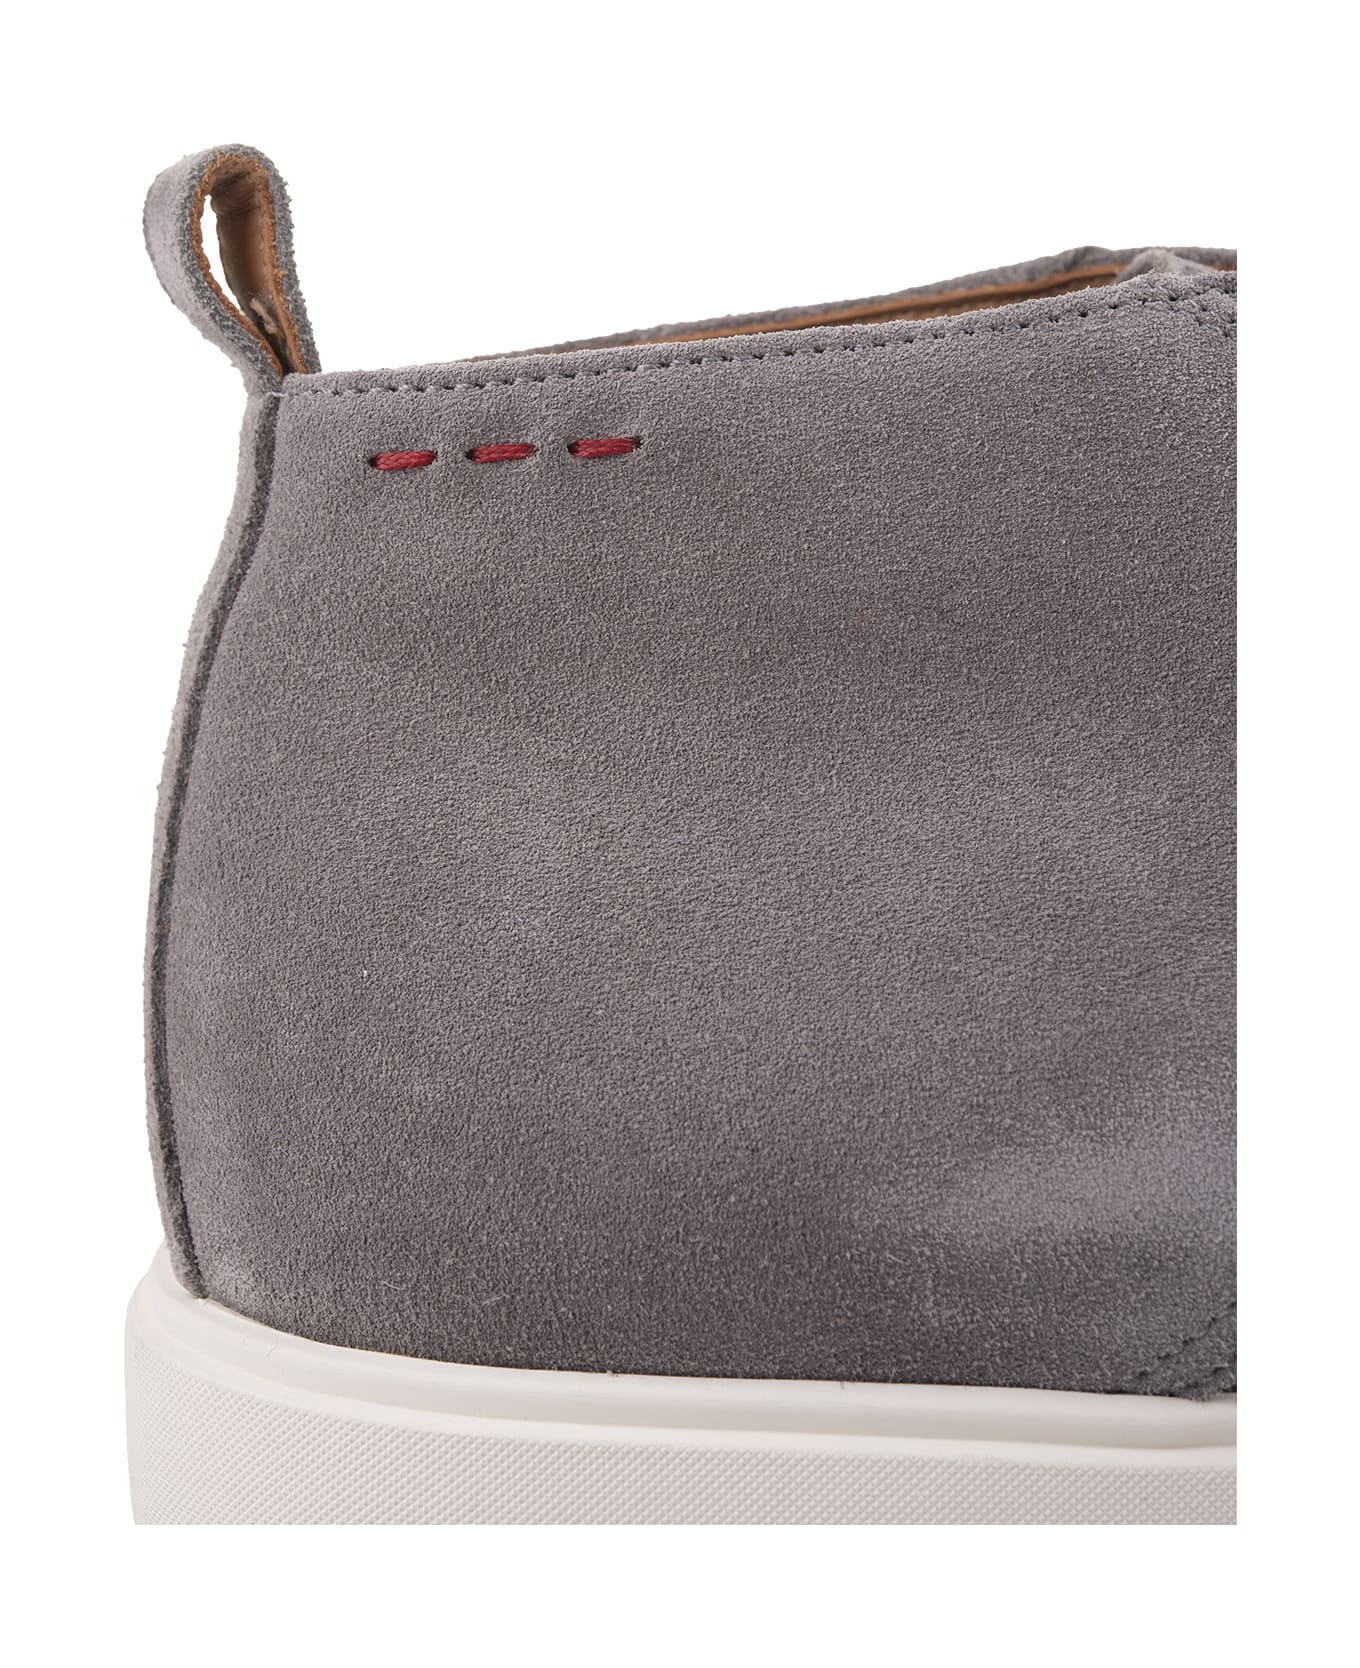 Kiton Grey Suede Laced Leather Ankle Boots - Grey